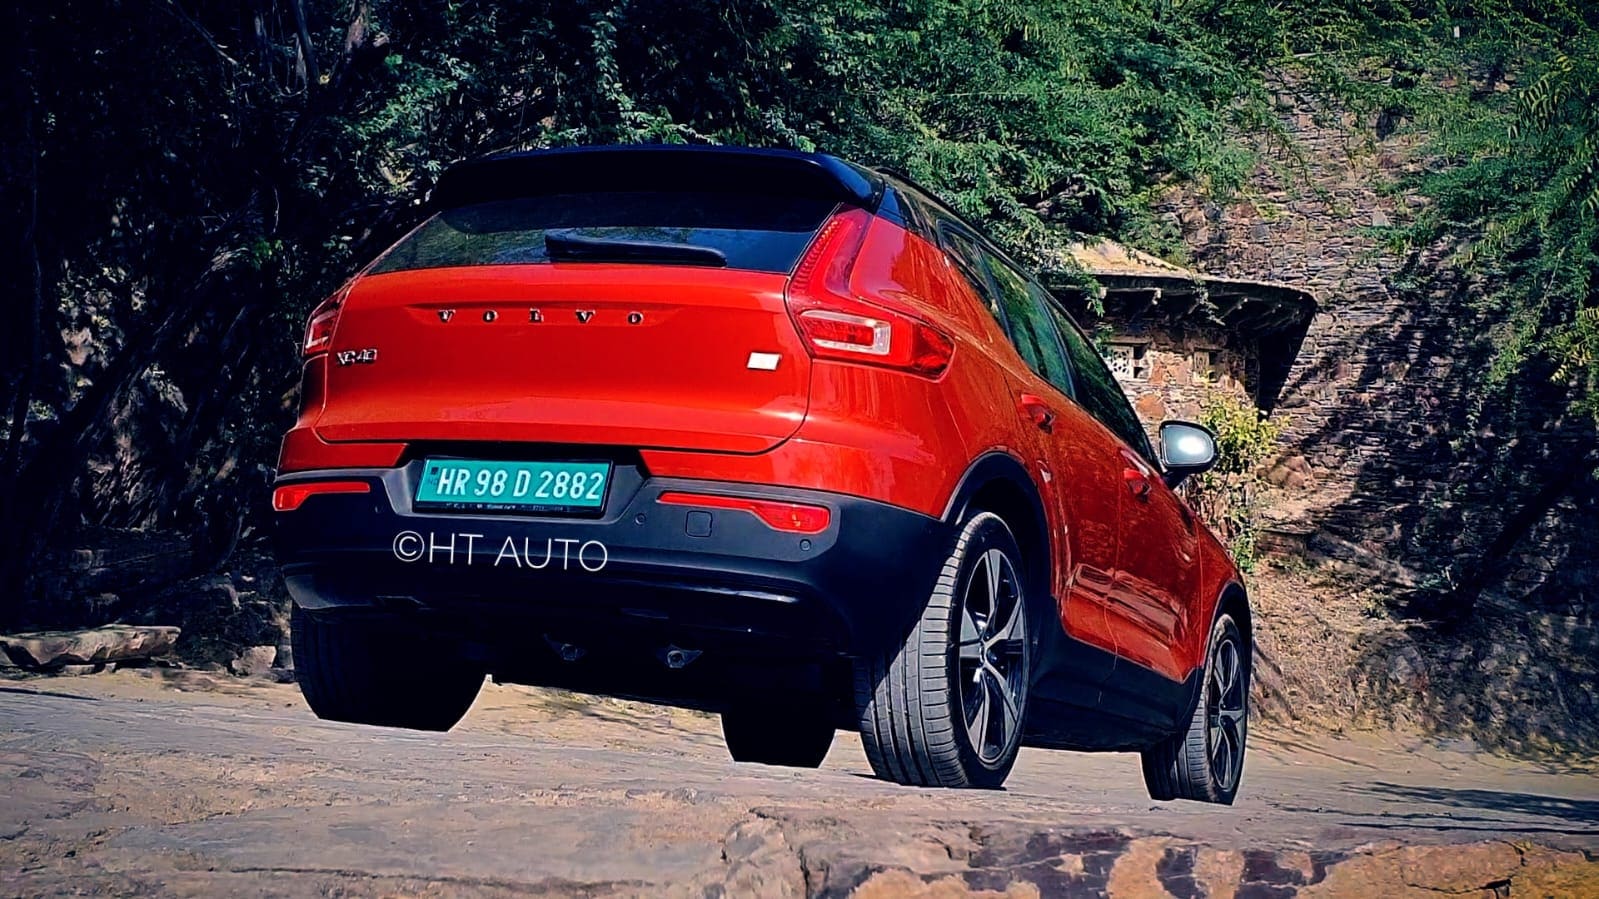 The pricing of the XC40 Recharge in India will be rolled out in the next few months and it will join the burgeoning luxury electric SUV segment in the country.